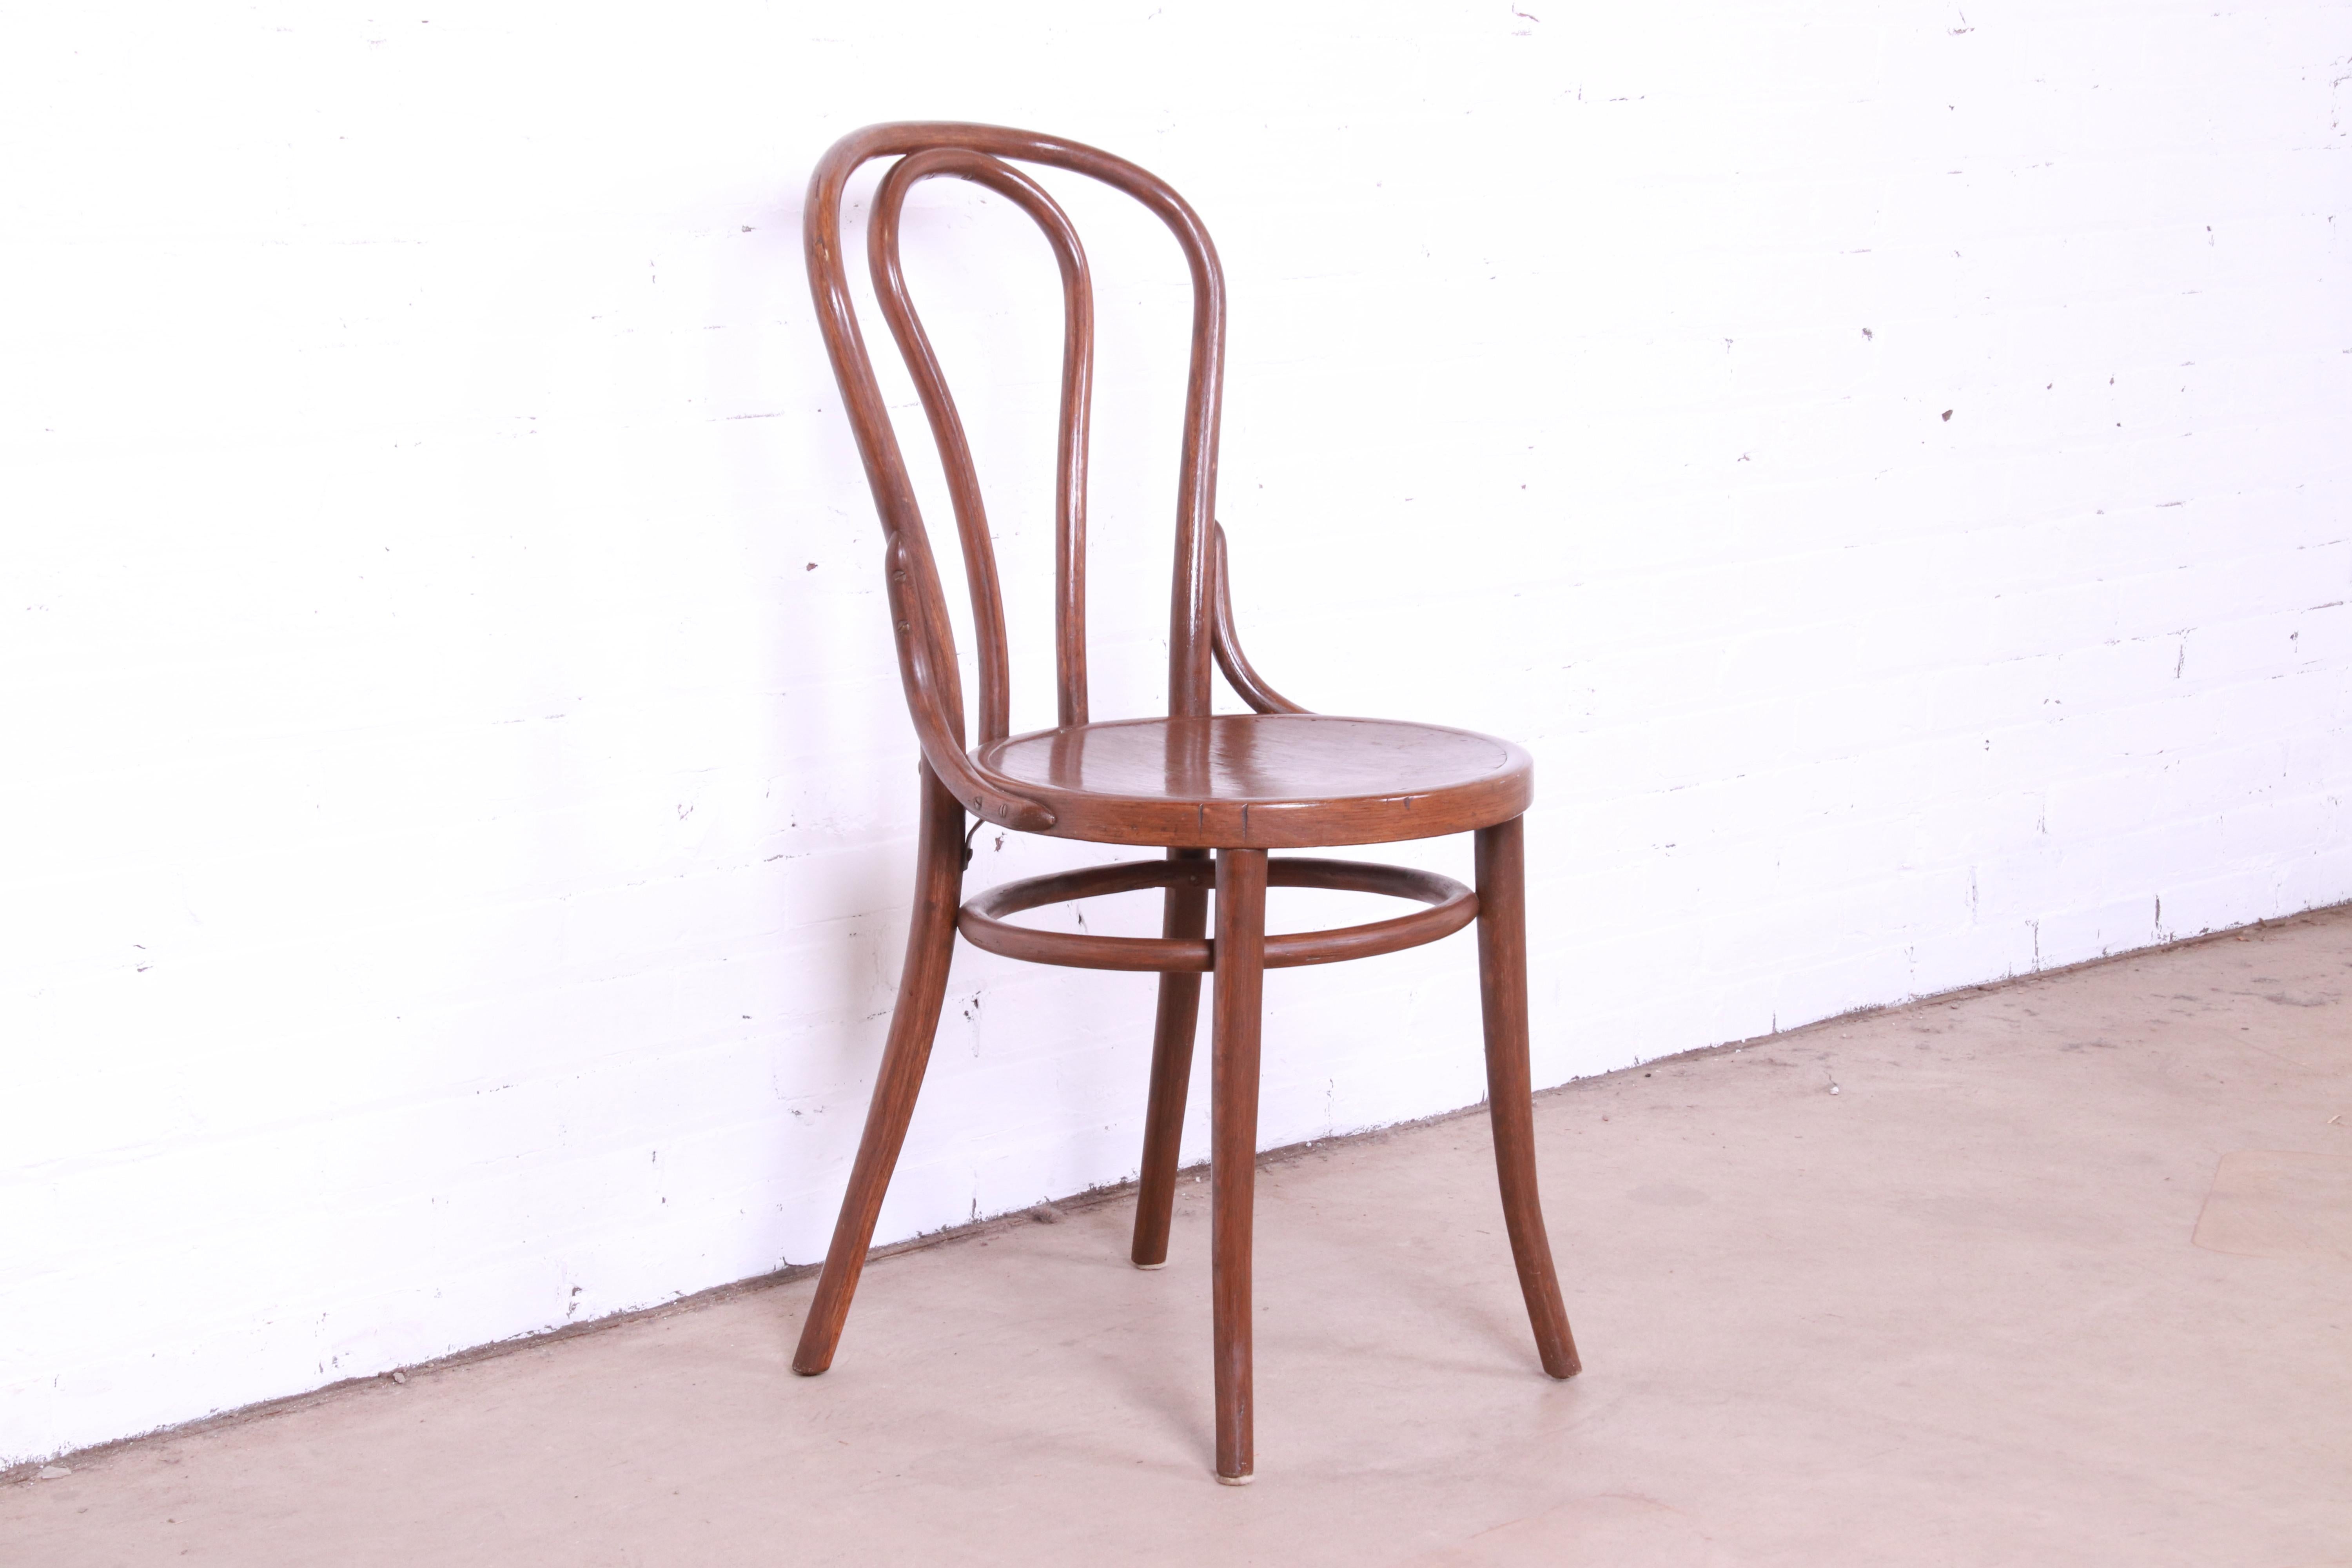 20th Century Vintage Bentwood Desk Chair or Side Chair Attributed to Thonet